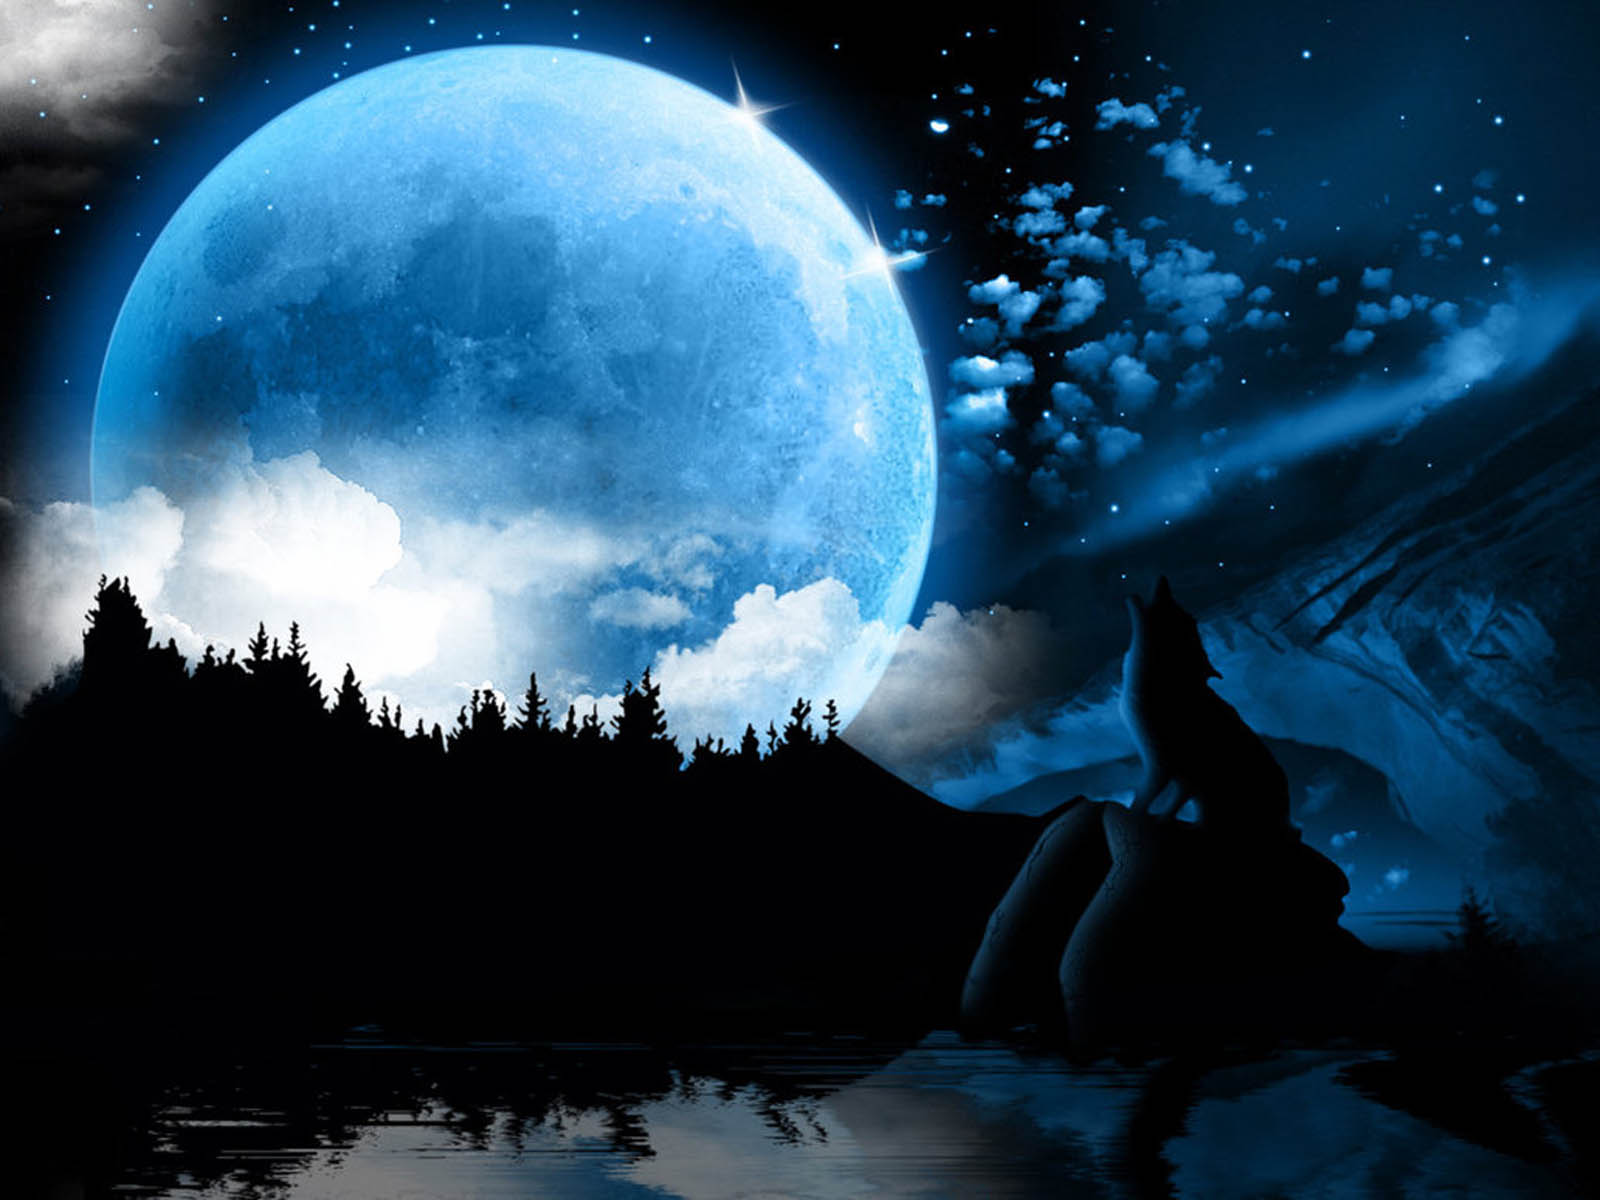 Tag Moon Fantasy Wallpapers Backgrounds Paos Images and Pictures